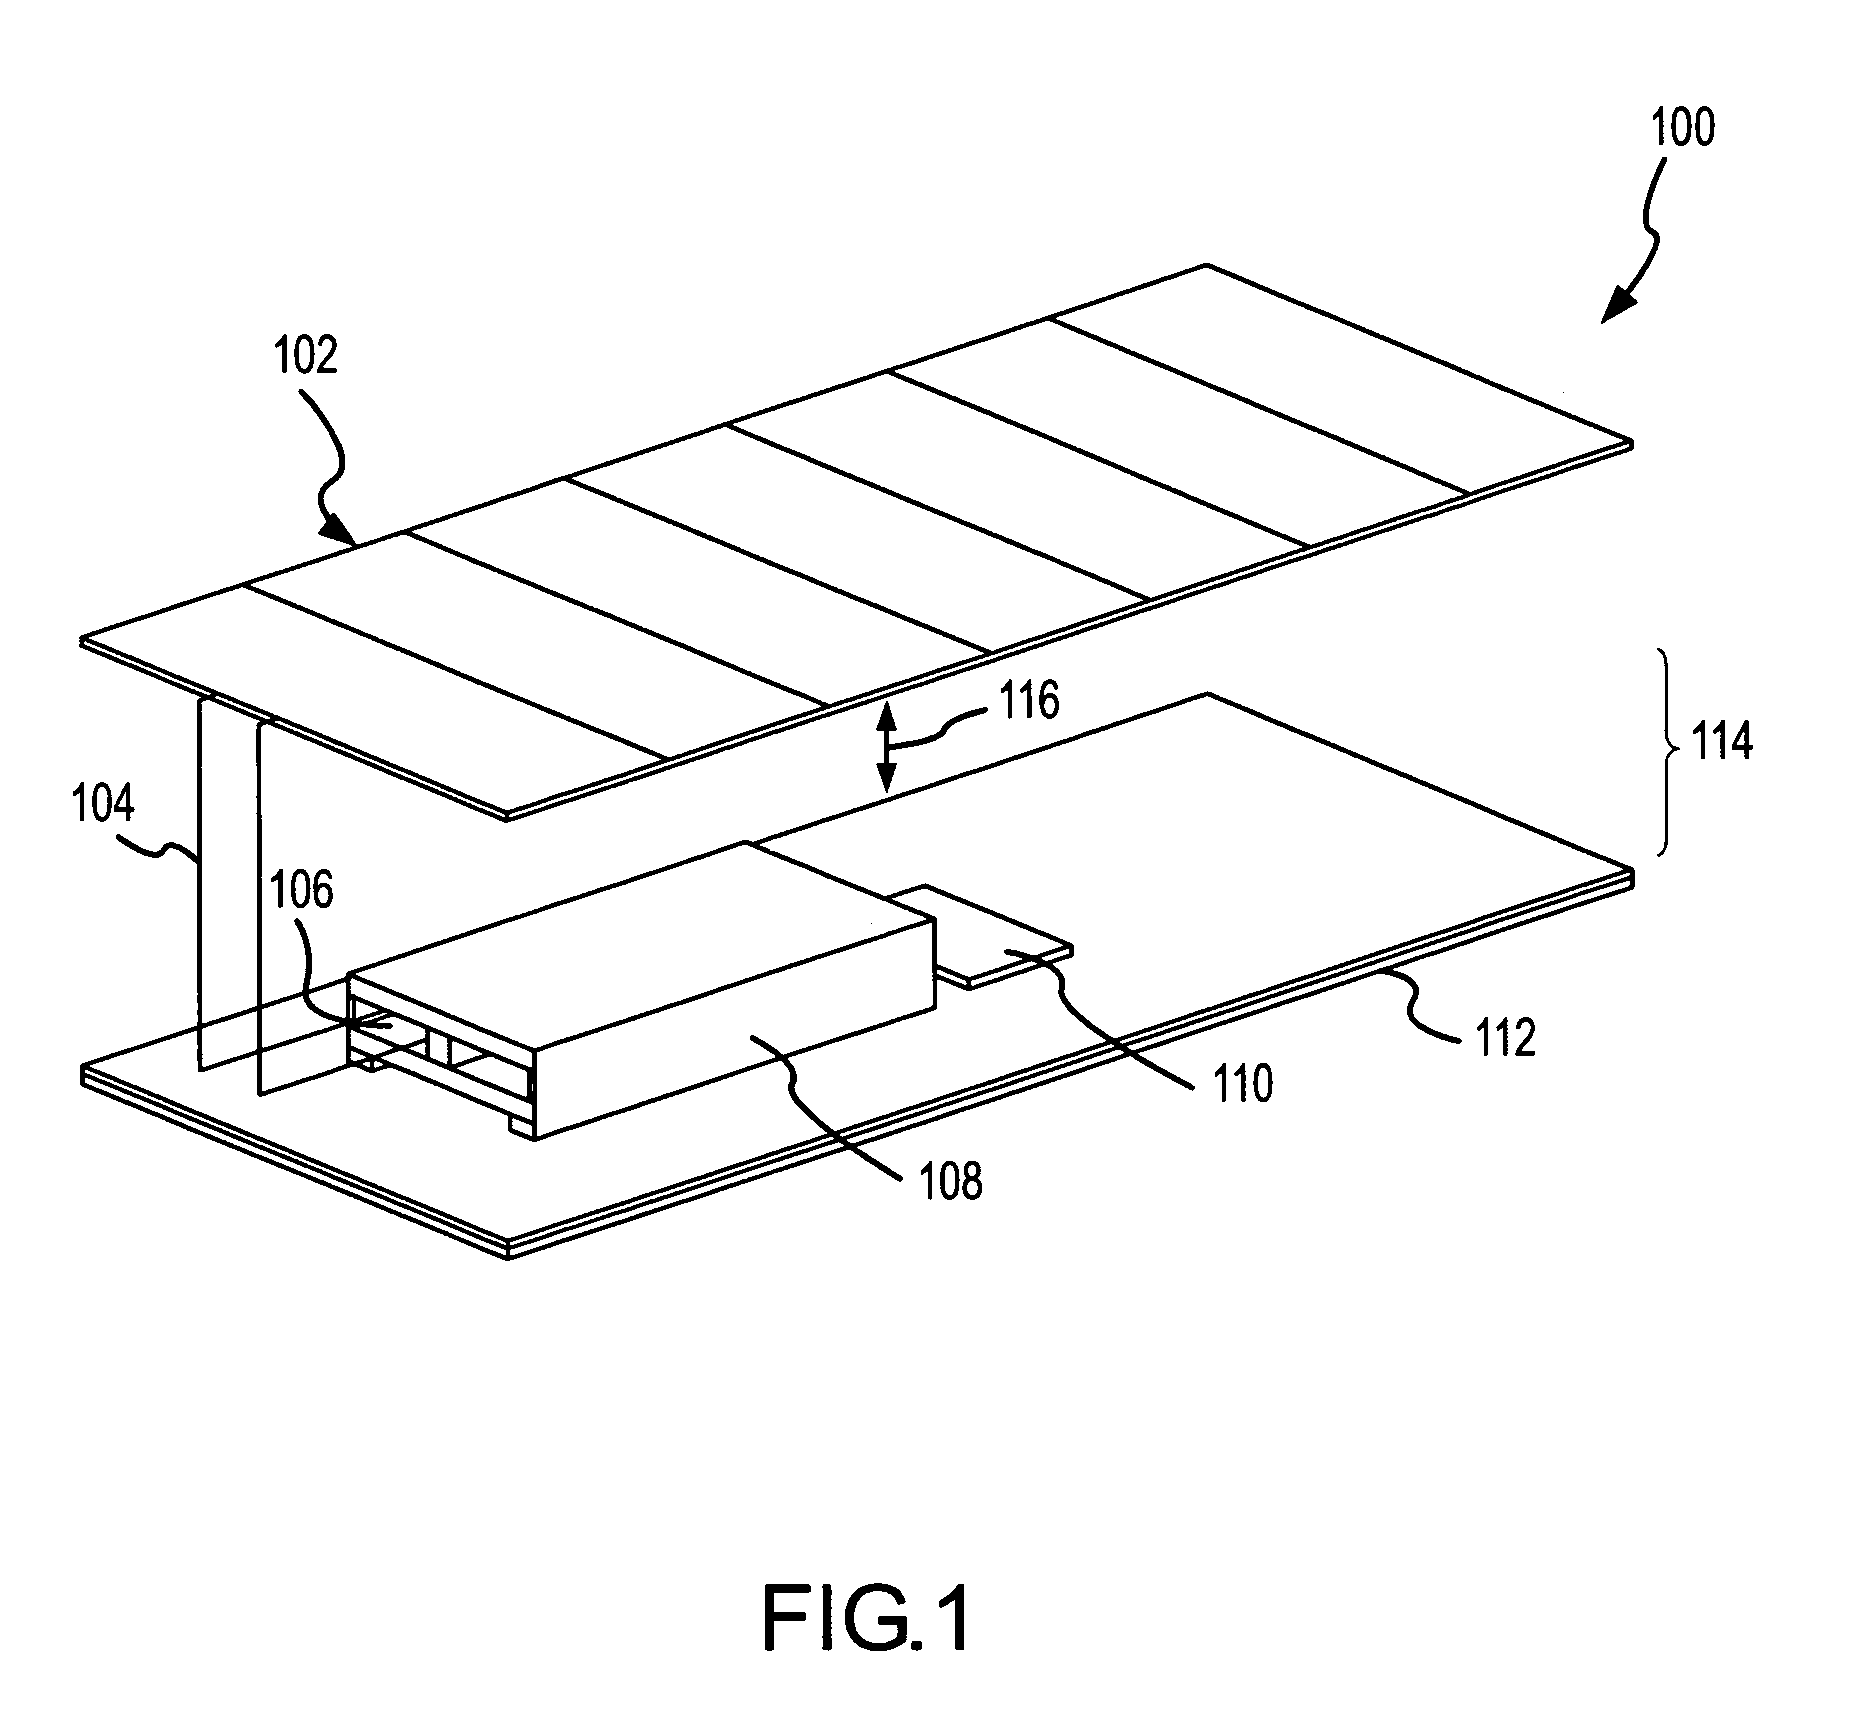 Passive thermal control system